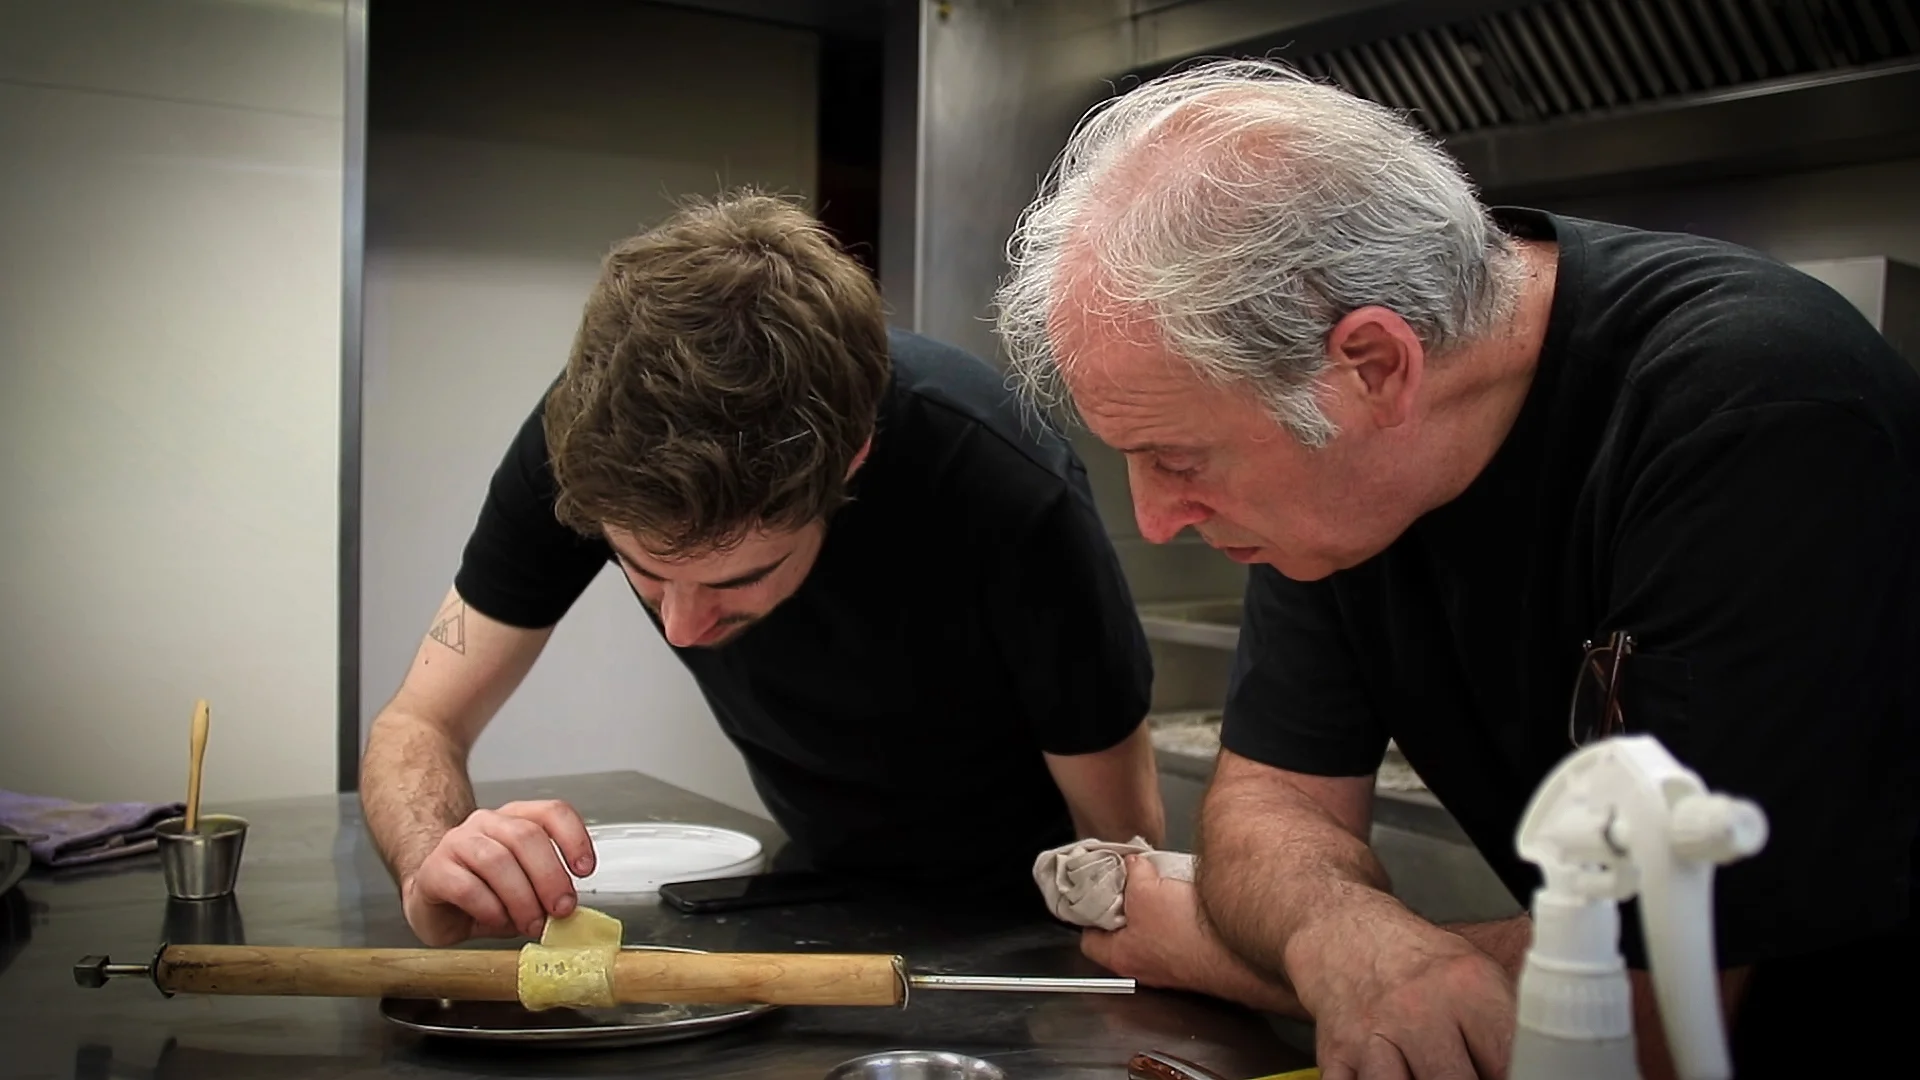 In a kitchen, two chefs look at a pastry.